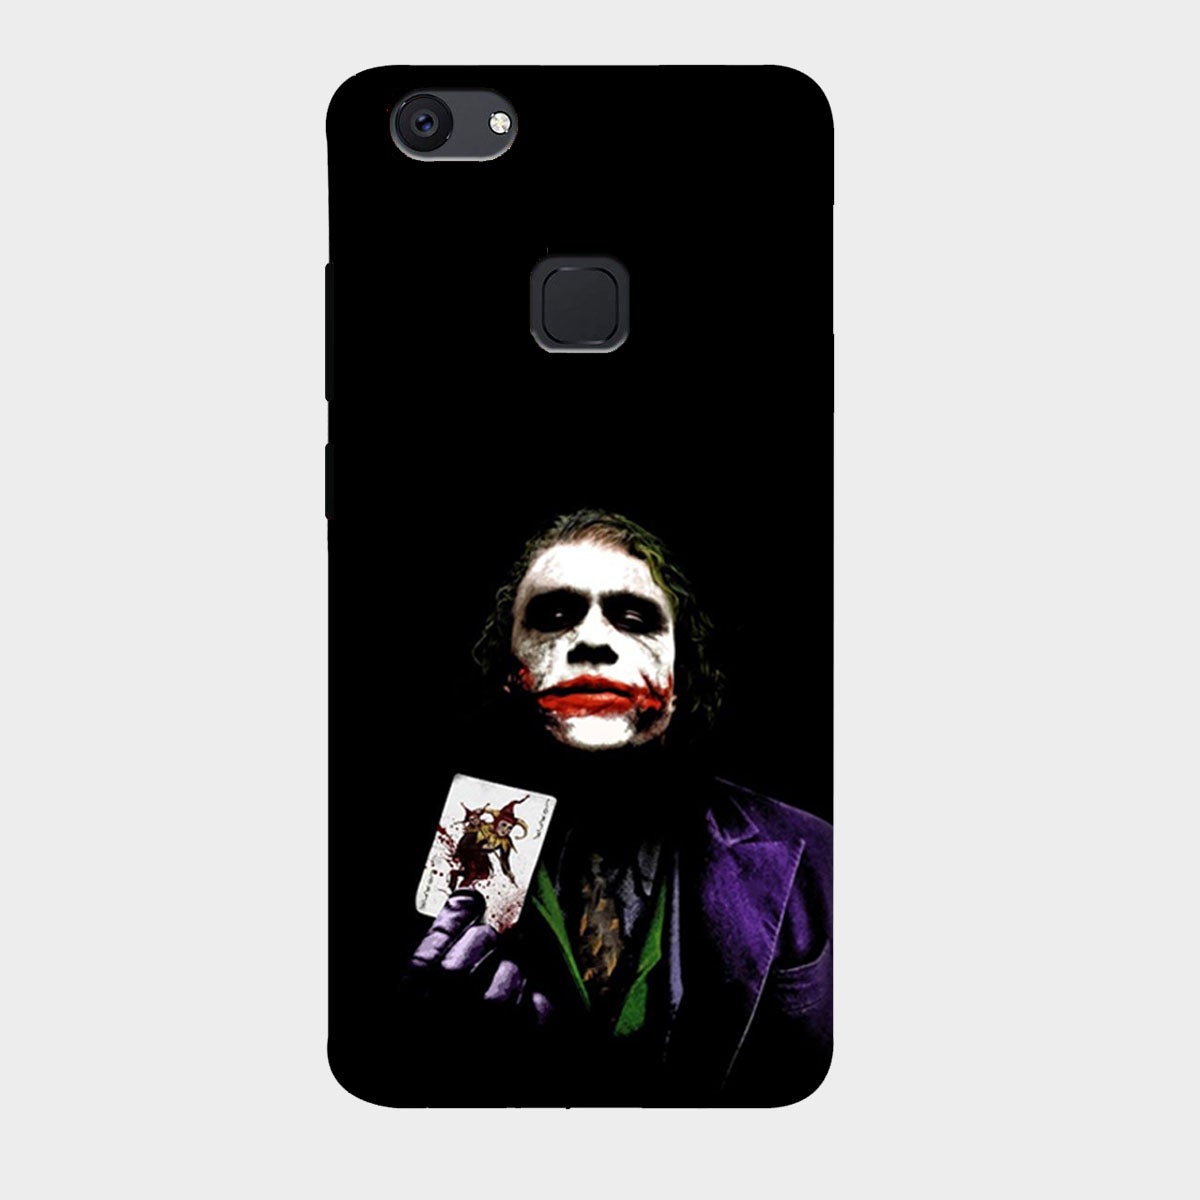 The Joker with Card - Mobile Phone Cover - Hard Case - Vivo